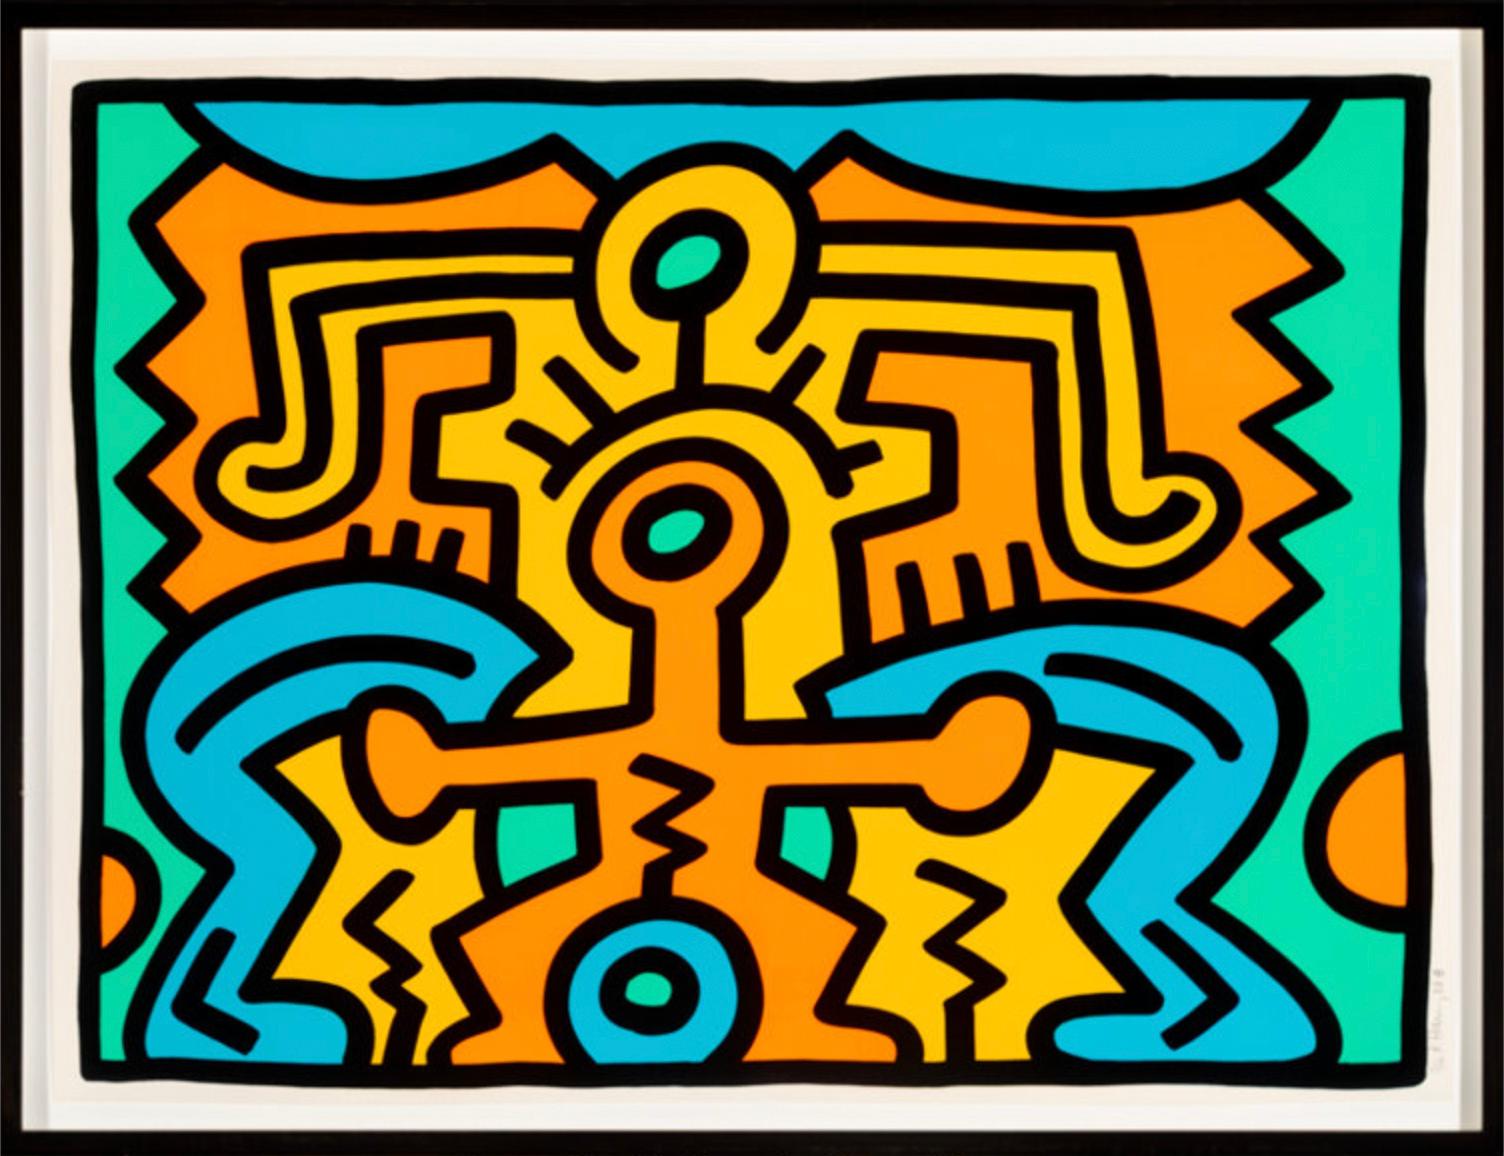 What mediums did Keith Haring use?